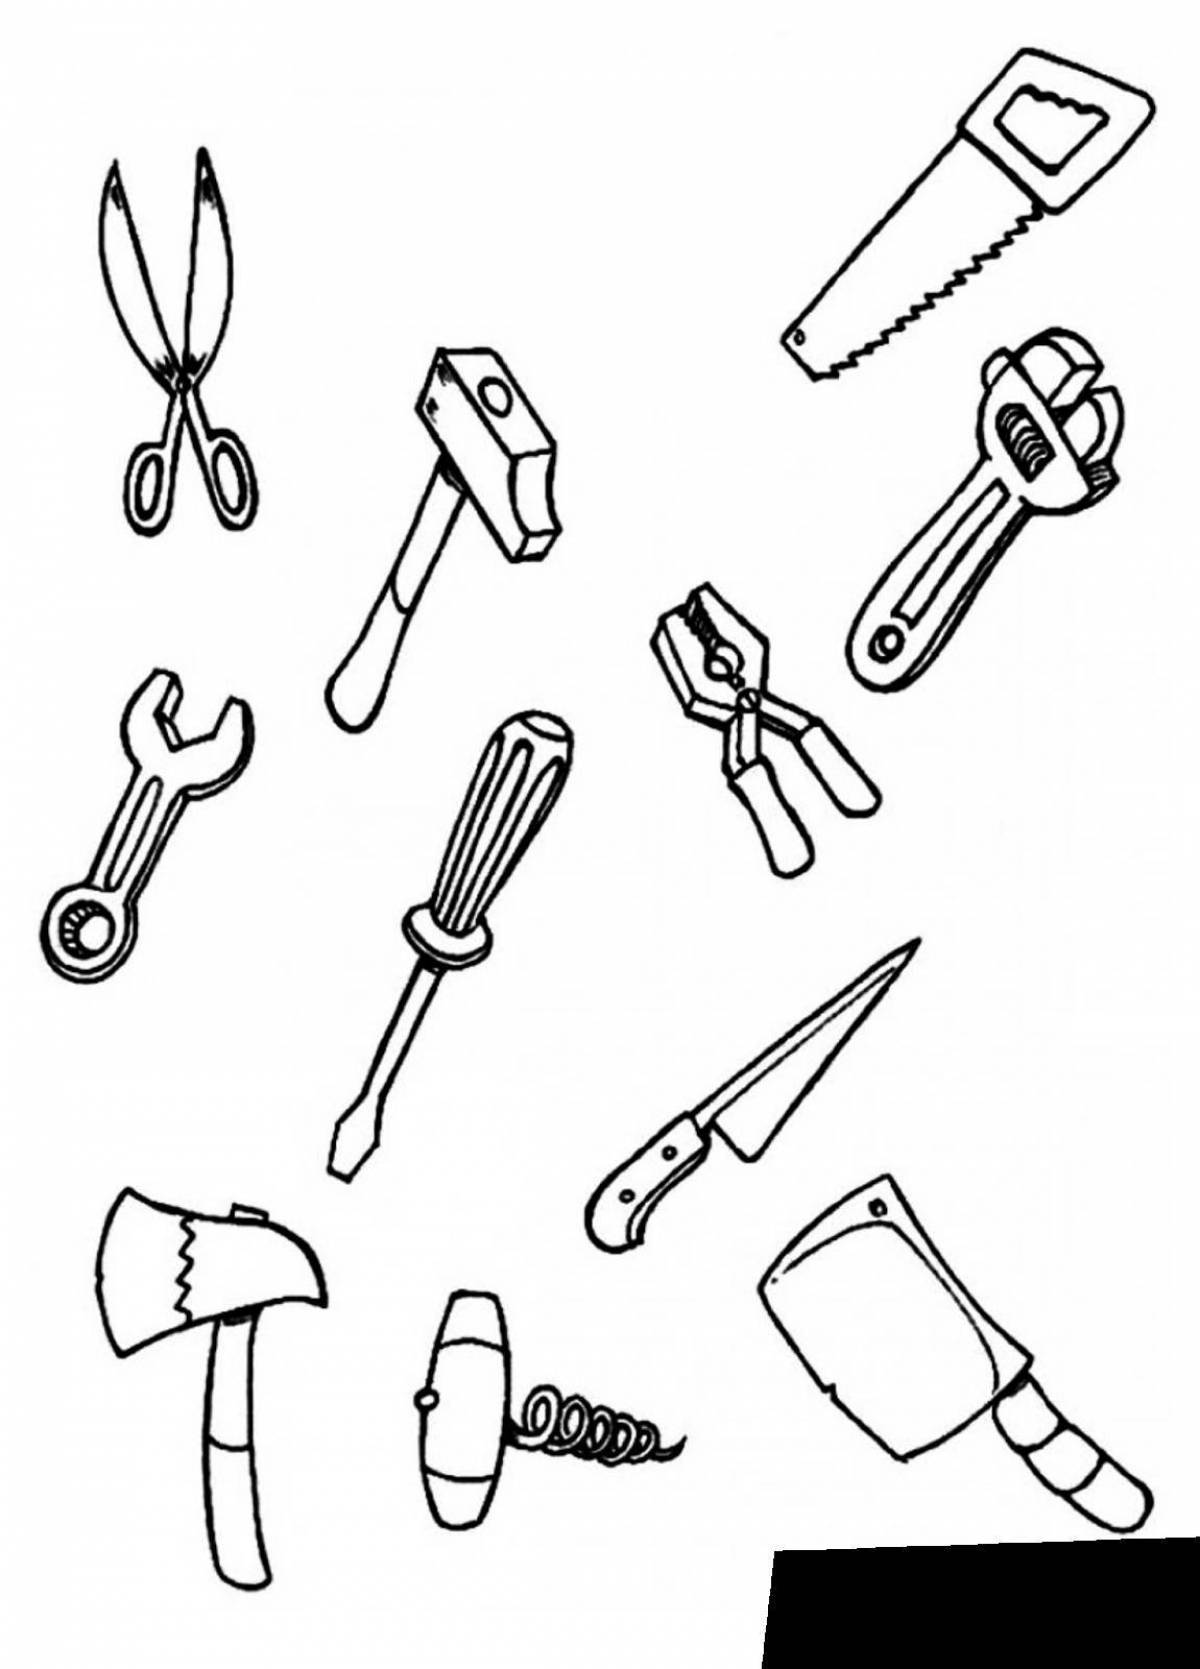 Attractive tools coloring page